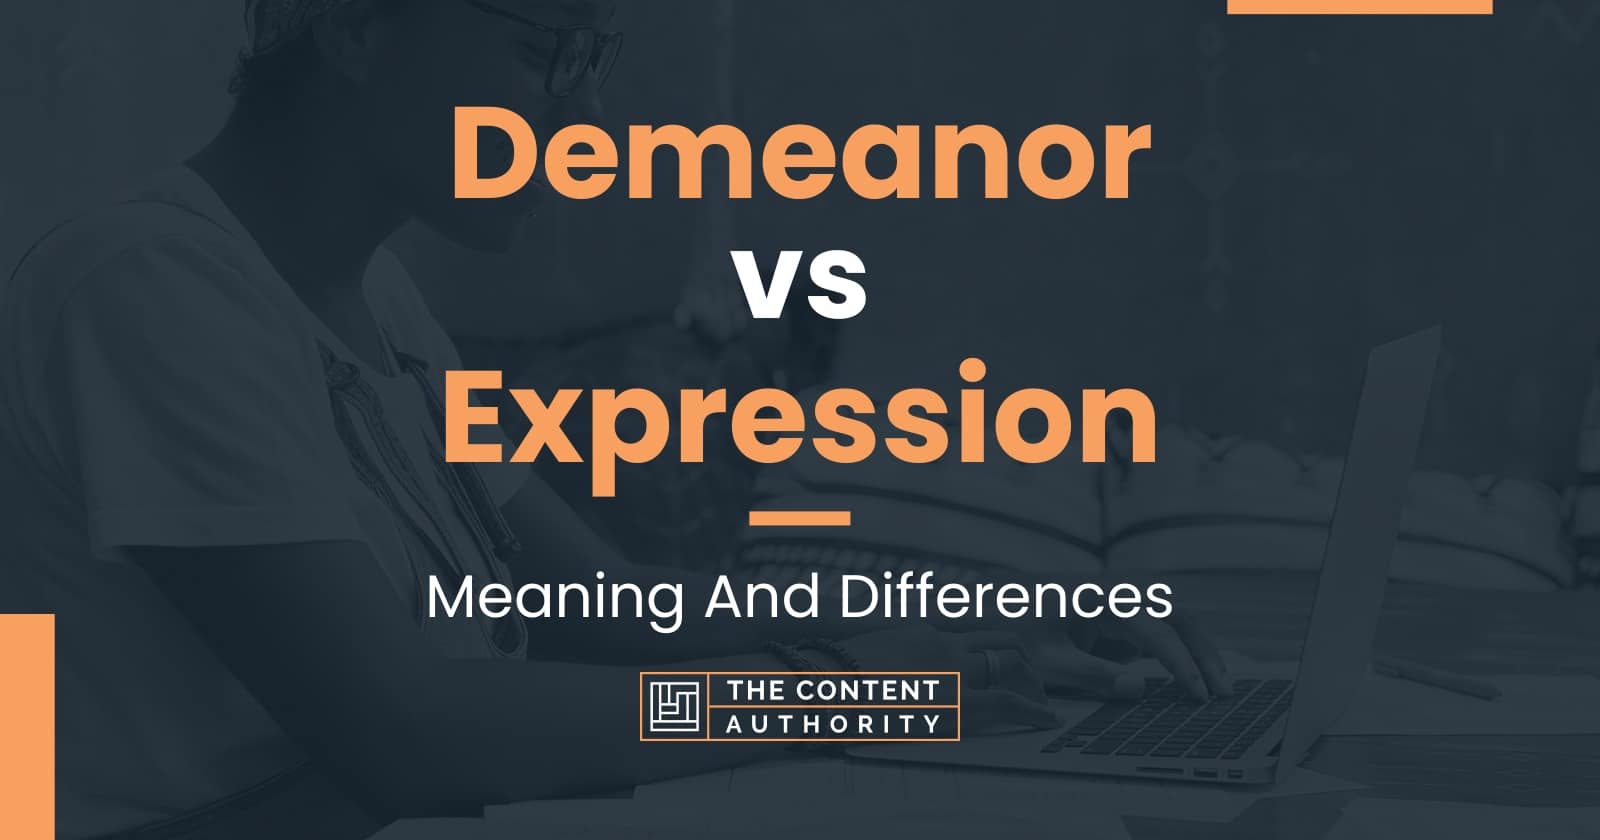 Demeanor vs Expression: Meaning And Differences